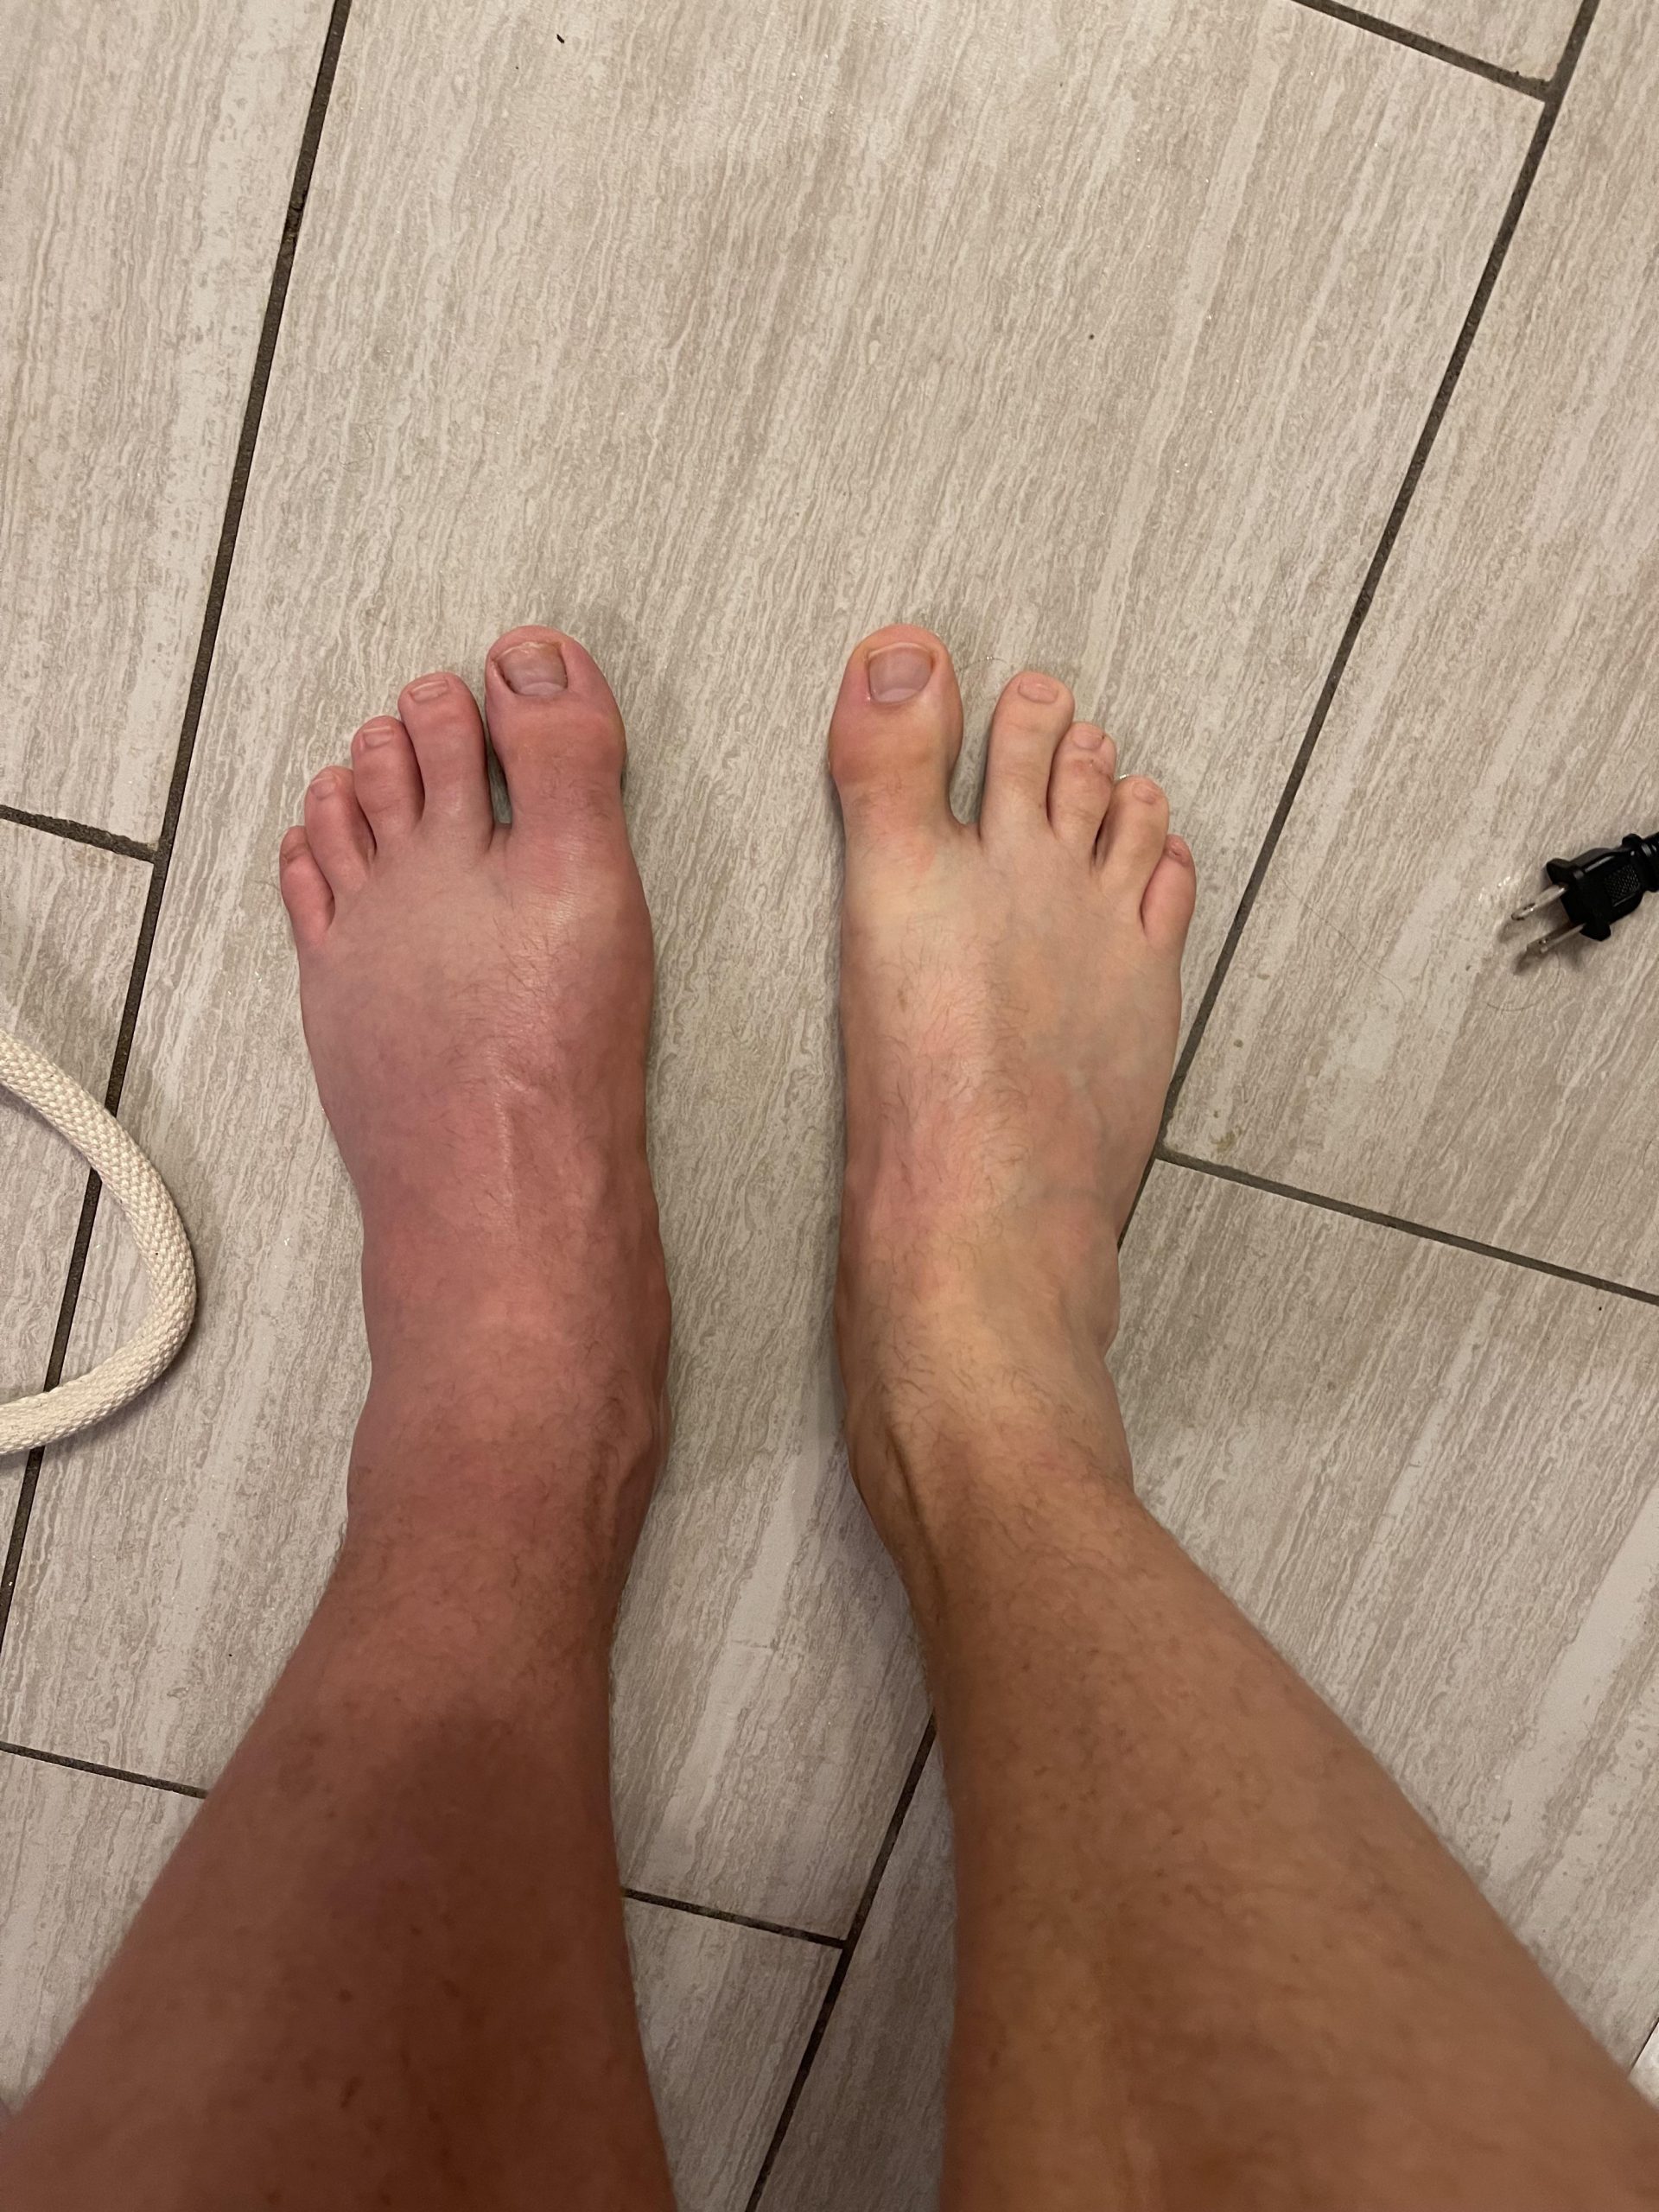 What gout looks like. So very painful : mildlyinteresting